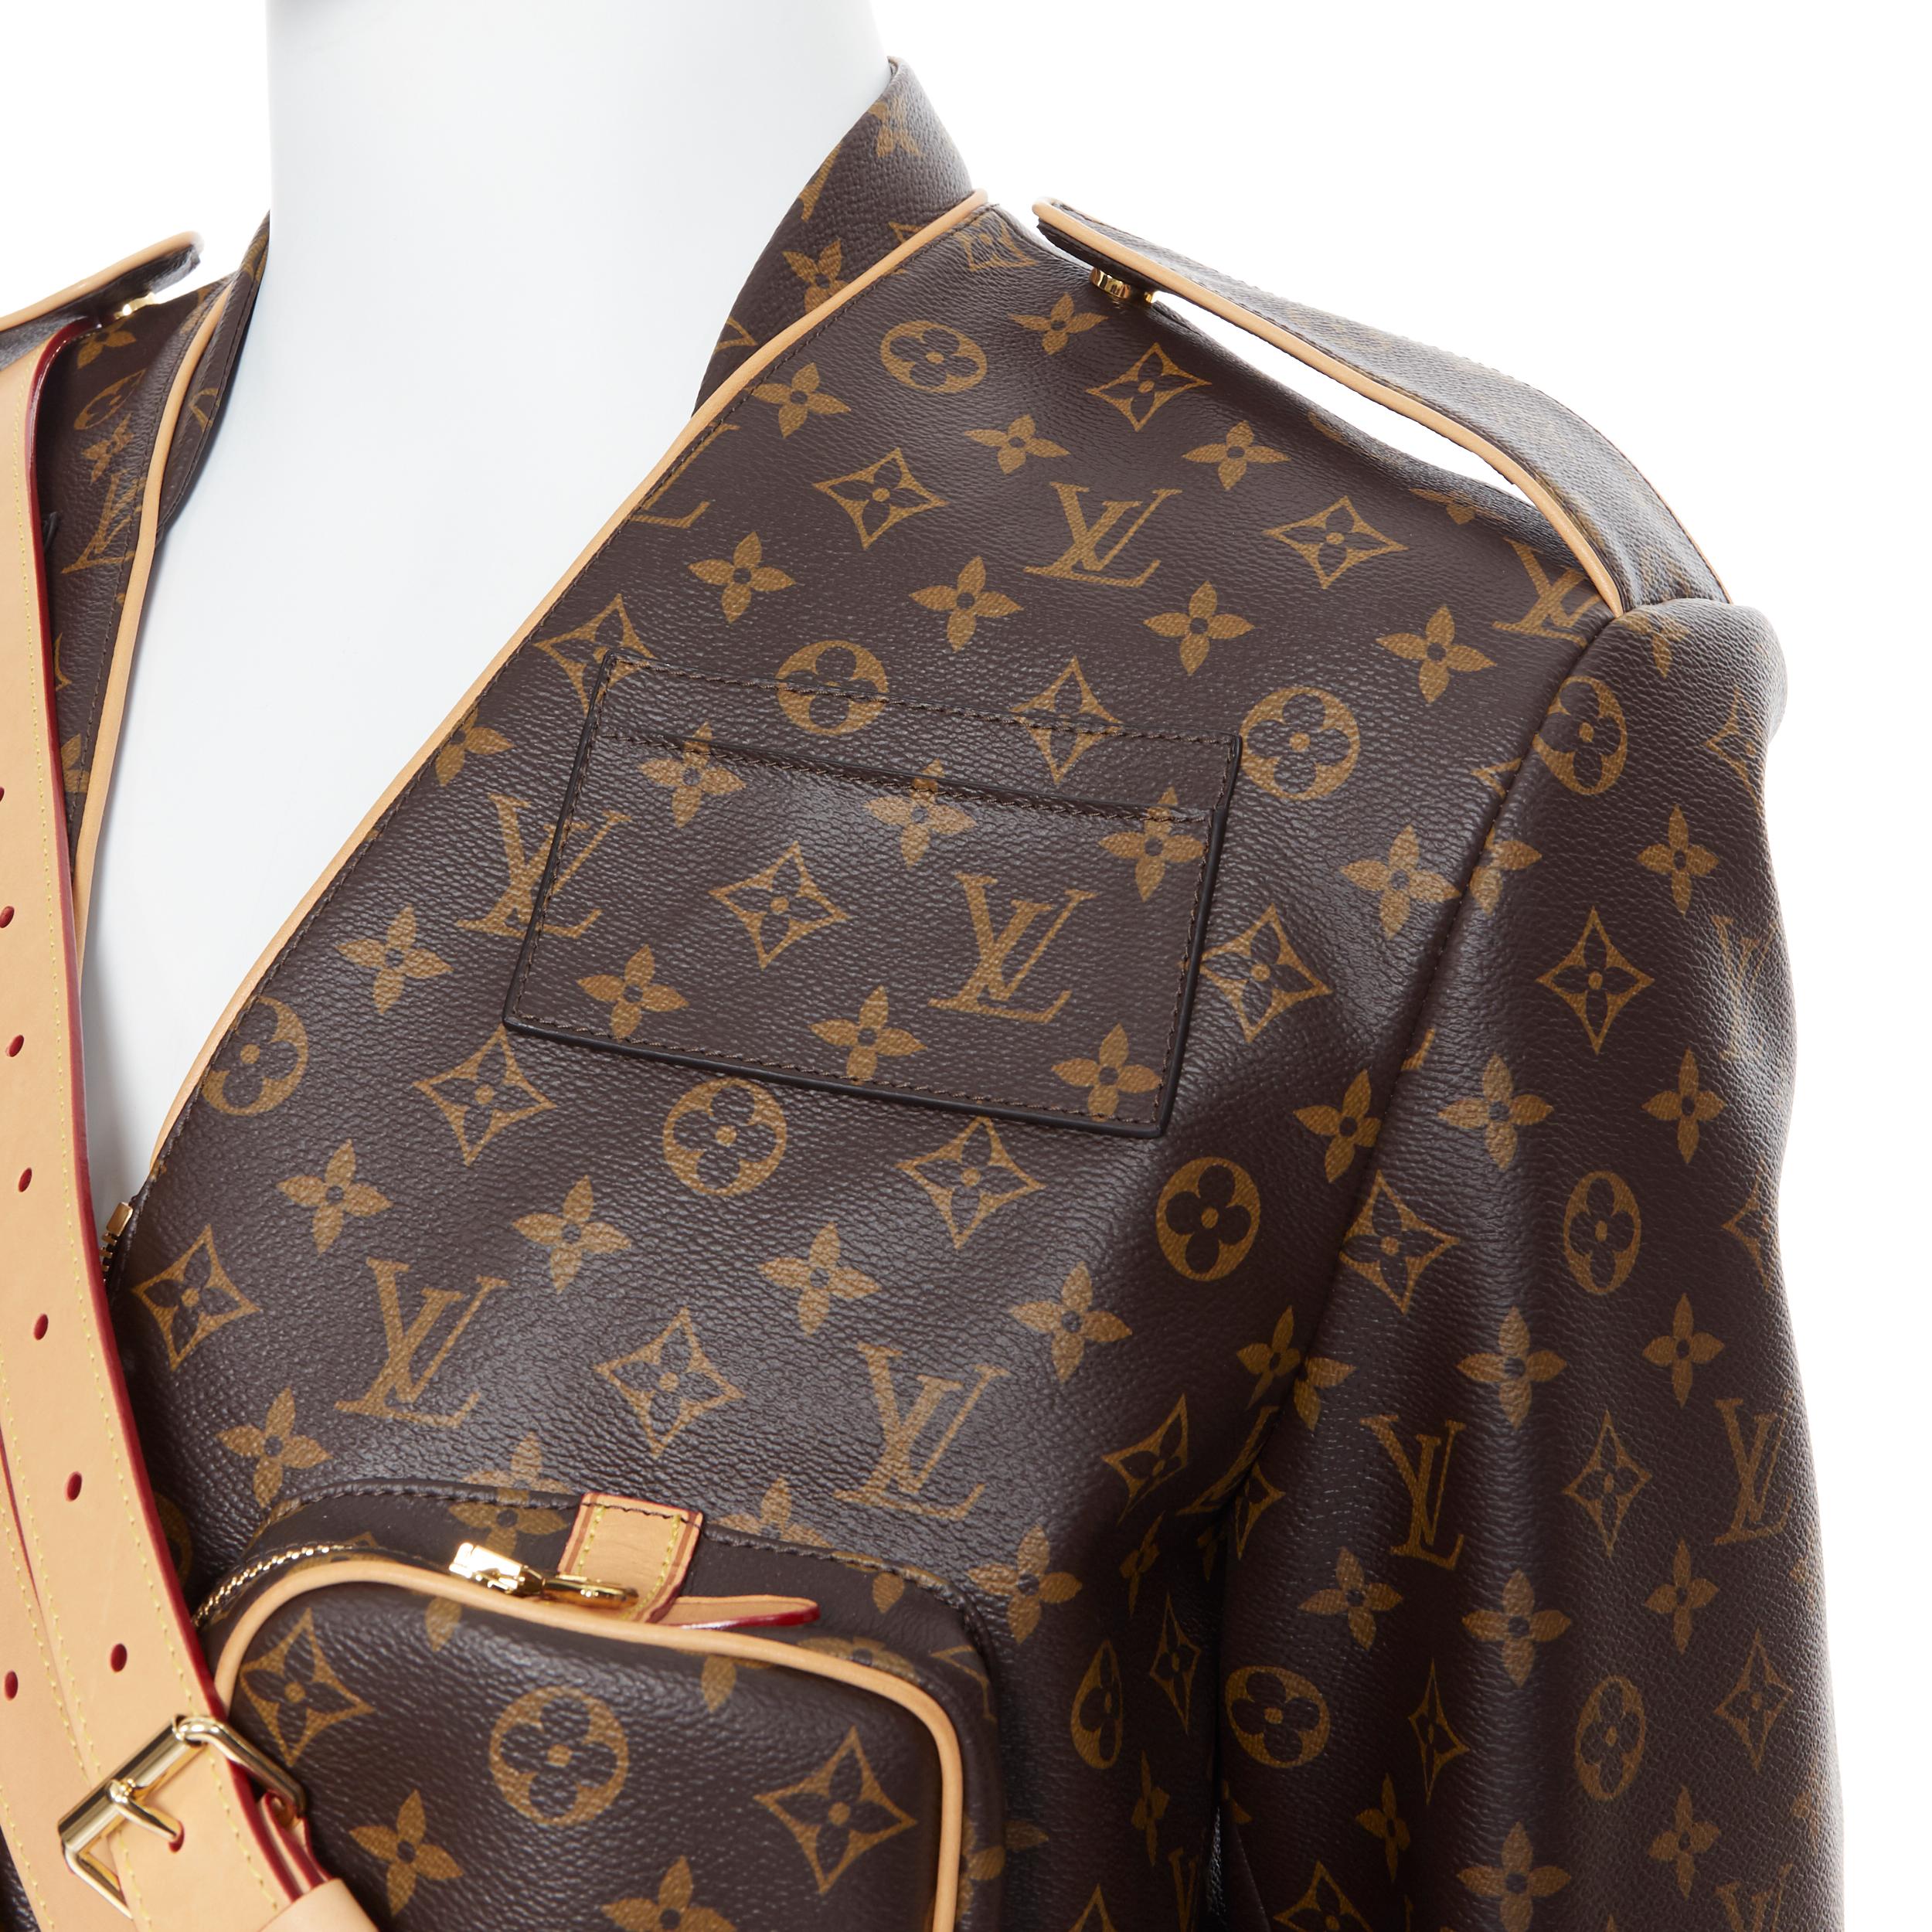 runway LOUIS VUITTON AW19 Sample Admiral brown monogram canvas jacket FR48 M Reference: JHVC/A00003 Brand: Louis Vuitton Designer: Virgil Abloh Collection: Fall Winter 2019 Runway Material: Unknown Color: Brown Pattern: Other Closure: Zip Extra